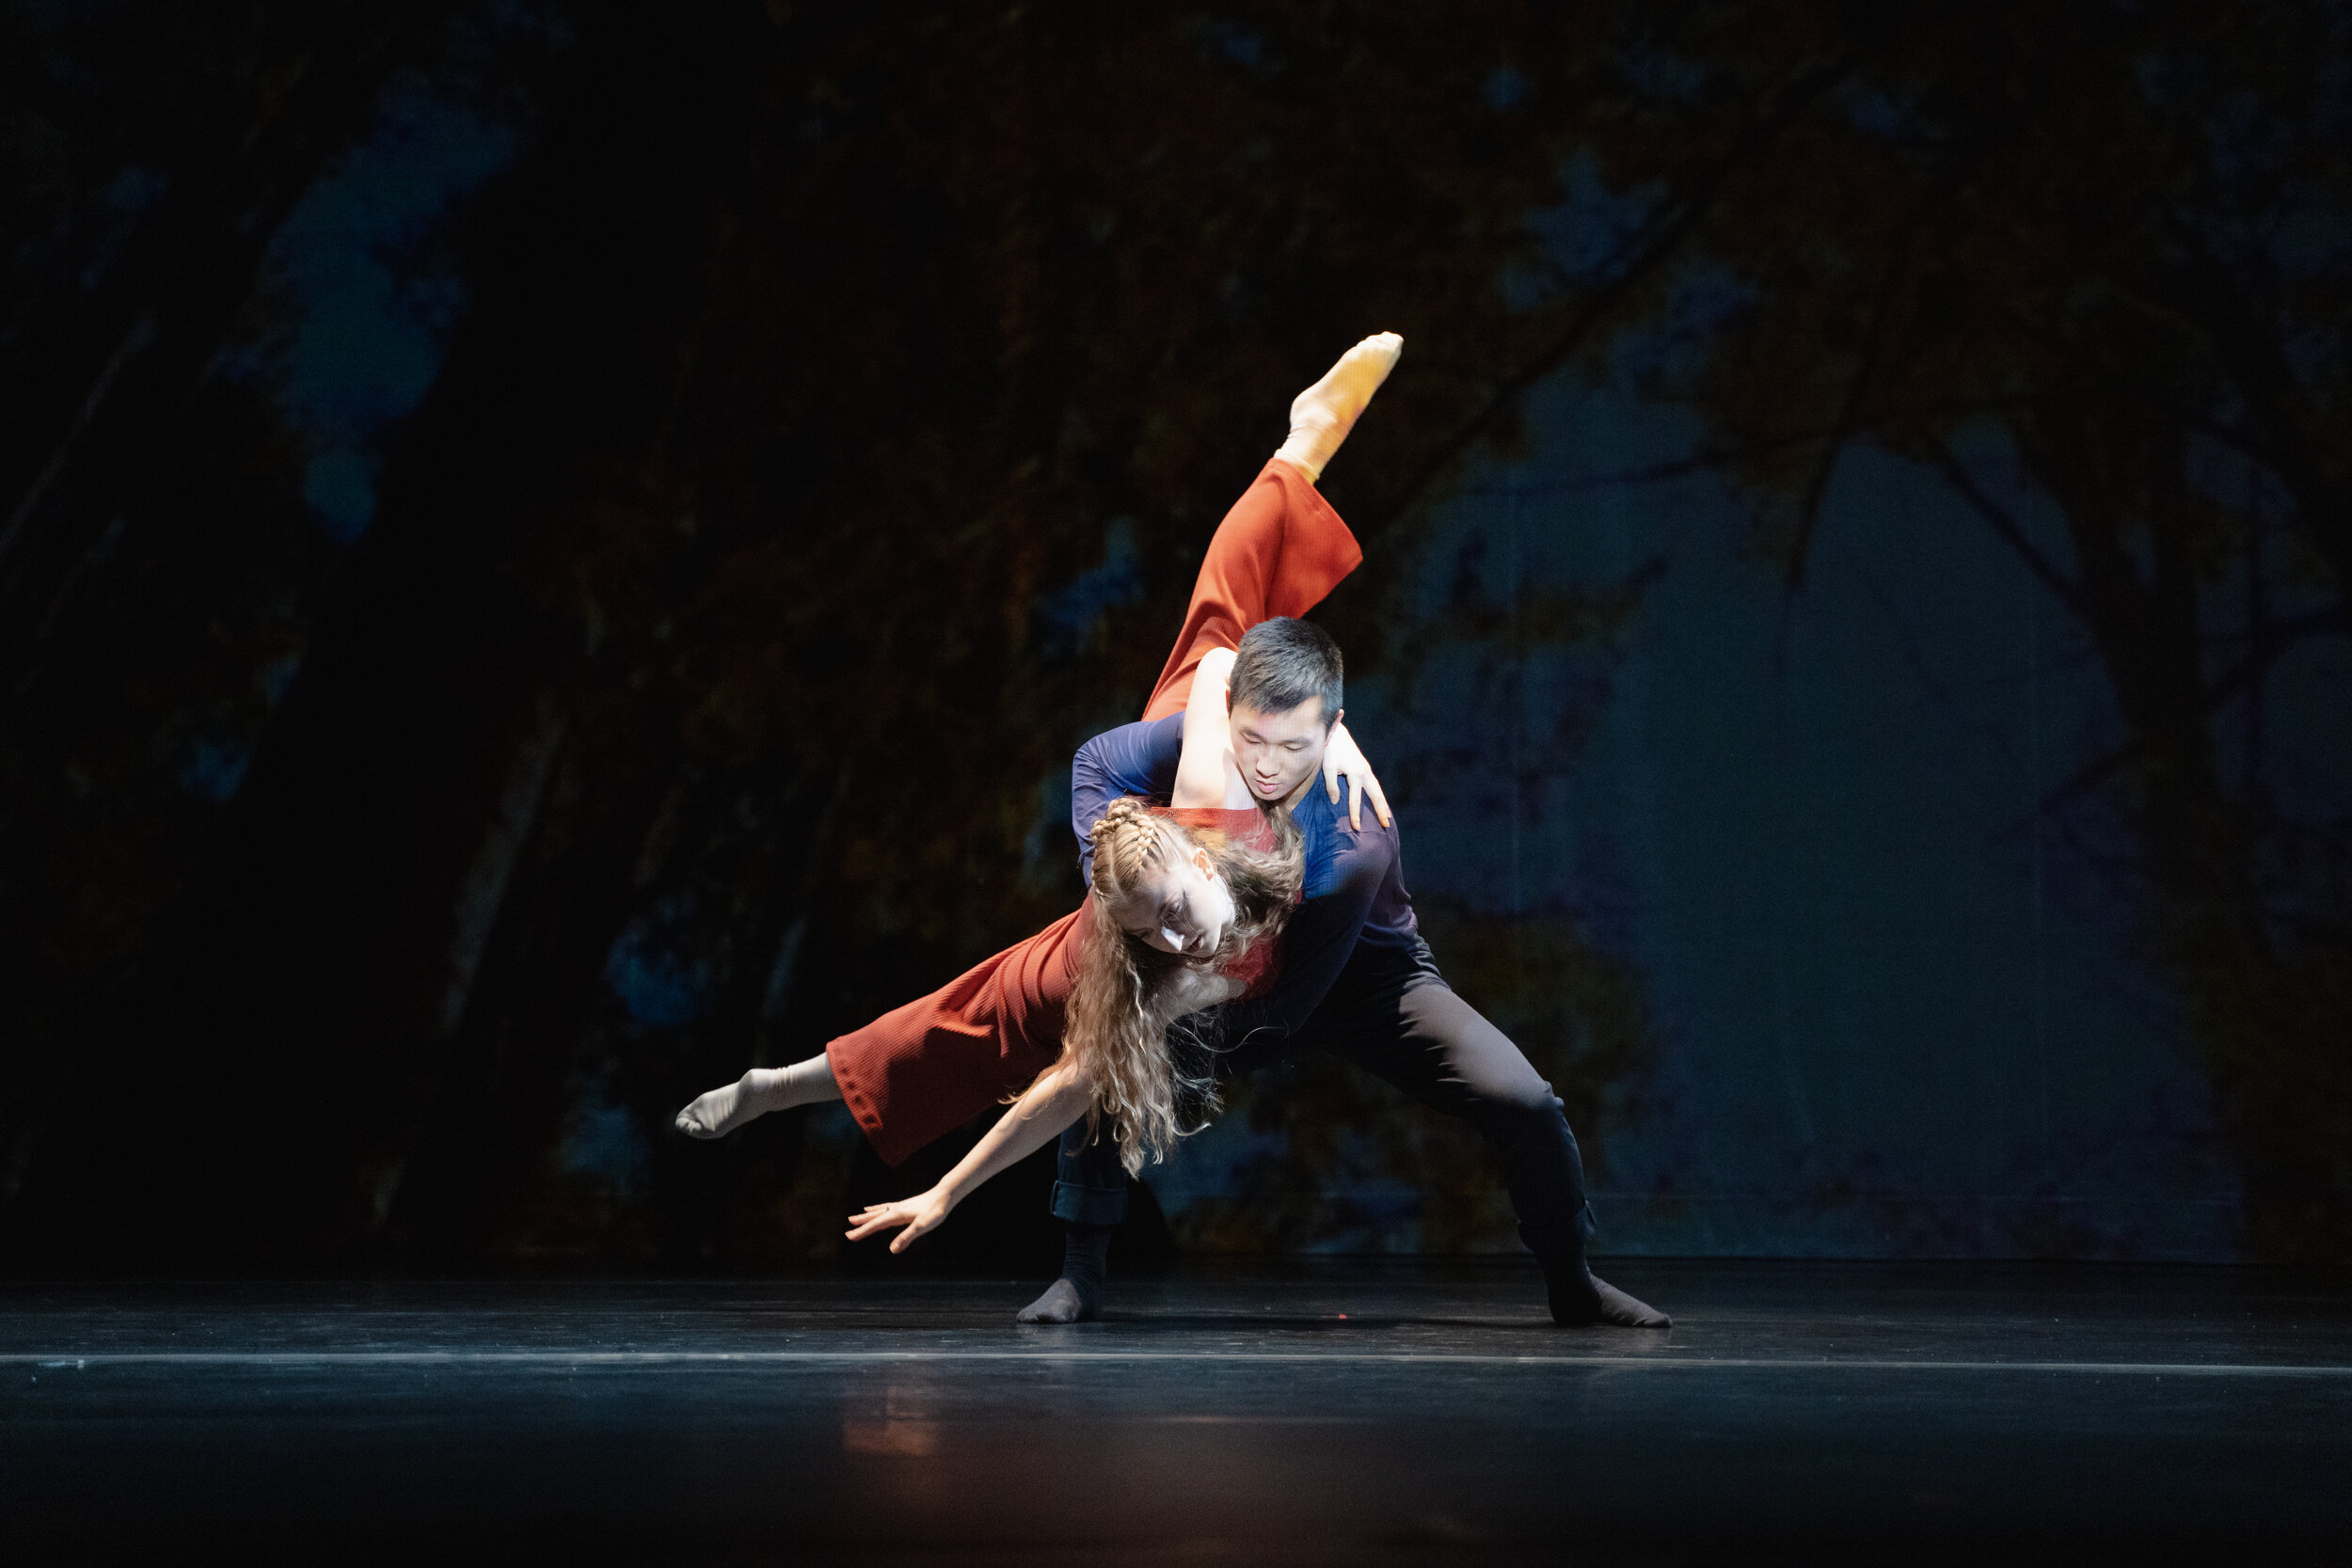  Photography by Benjamin Lappalainen Pictured: Ethan Kim &amp; Kathleen Pick Choreography by Joel Taylor Costume Design by Alessia Urbani Lighting Design by Emerson Kafarowski Projection Design by Sam Skynner 